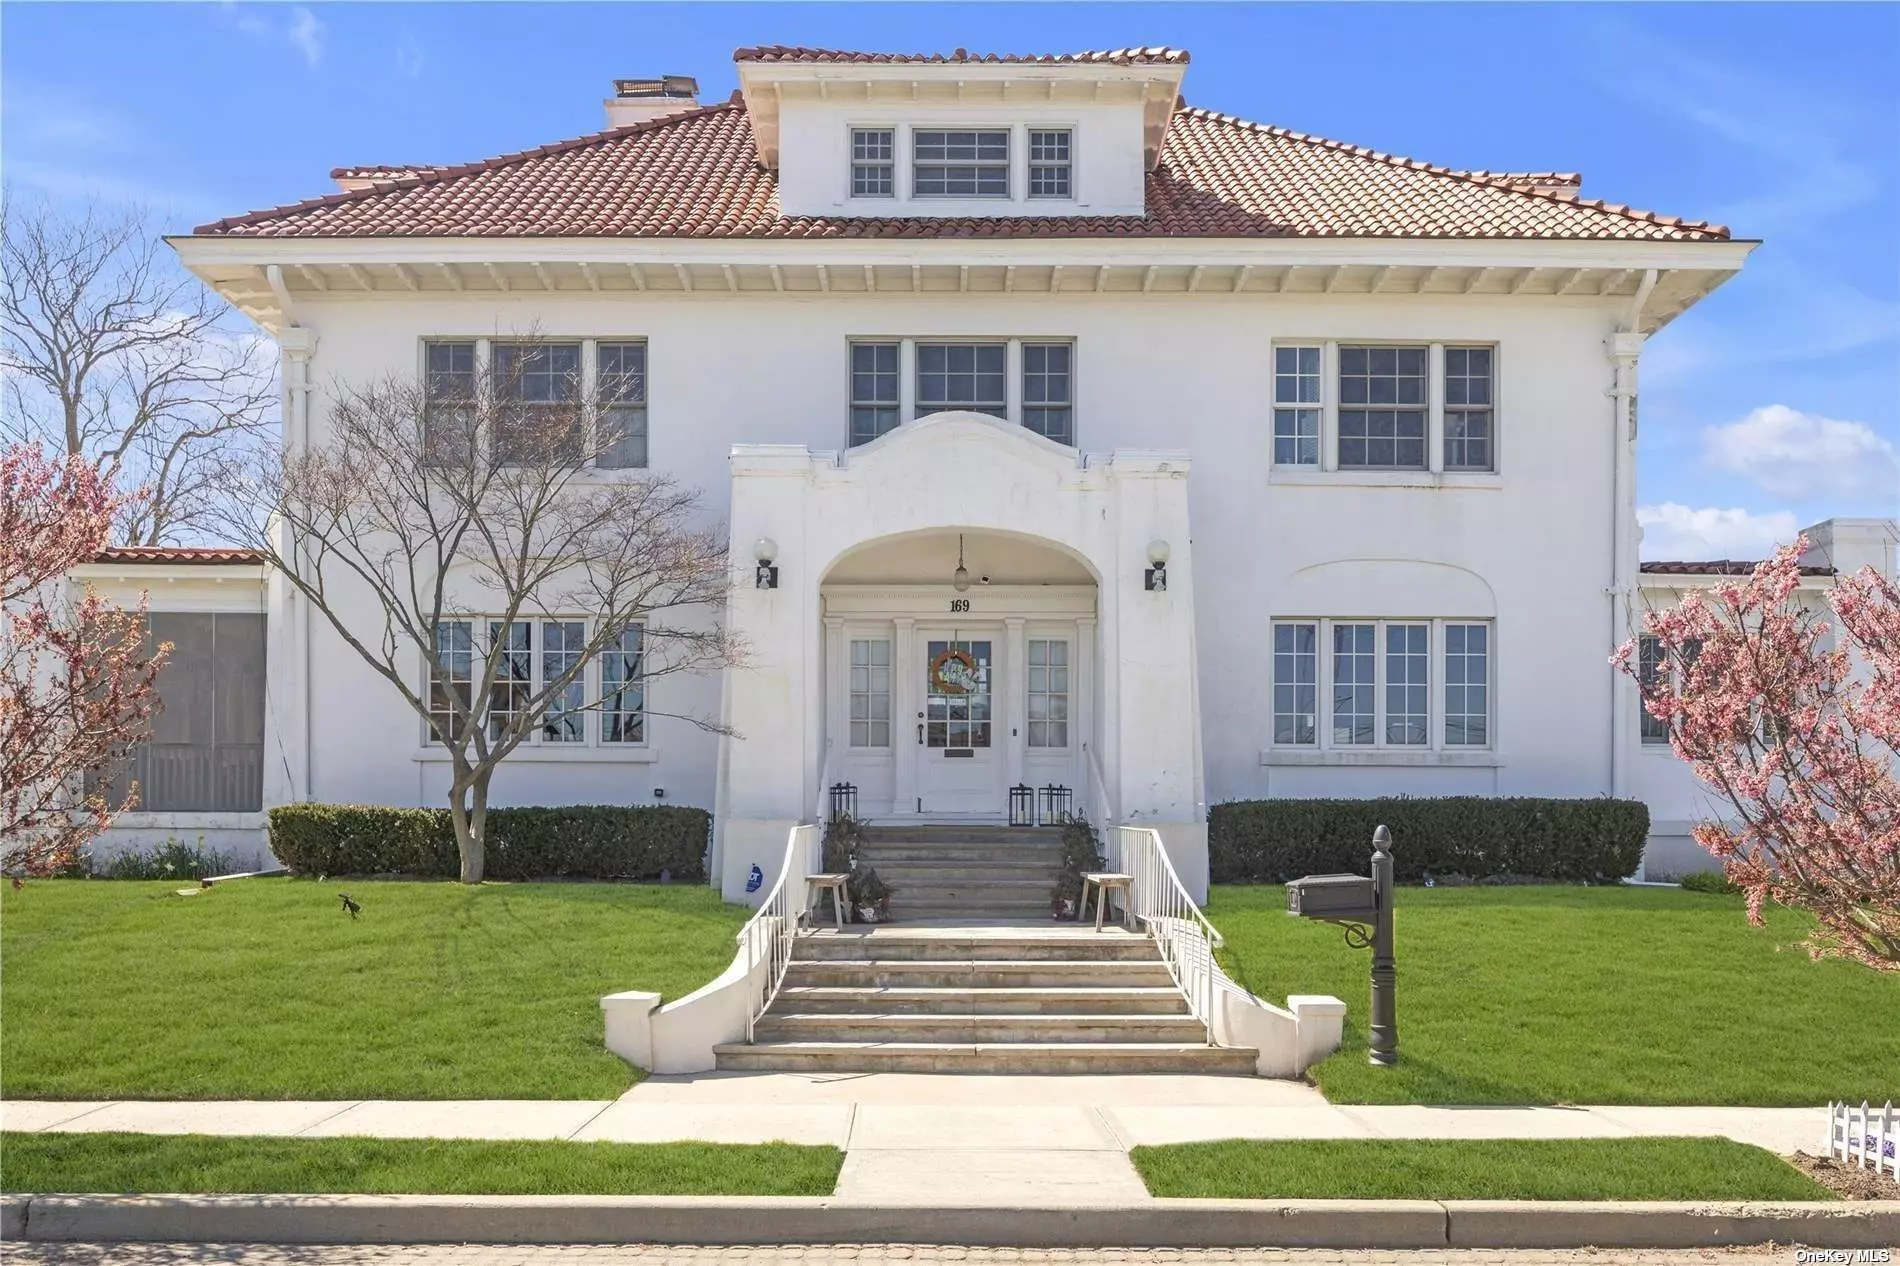 Meticulously restored historical home just steps from the beautiful ocean beaches on Long Island. This enchanting property has a luxuriously grand layout for entertaining, renovated w/ modern amenities for the best of both worlds. Enter the sumptuous foyer w/ its soaring ceilings & double spiral staircase. Spacious living room w/ wet bar leads into the sunroom. Cozy up in the formal dining room w/ wood burning fireplace. Gourmet kitchen filled w/ professional appliances: double sinks, 2 refrigerators, 2 ovens, gas stove, dishwasher & radiant heated floors. No home would be complete w/out an elegant butler&rsquo;s pantry w/ warming drawer. Ascend the spectacular staircase to your 4 bedrooms & 2 bespoke bathrooms w/ radiant heated floors & steam shower. On the top floor you have breathtaking views of the ocean & an open floorplan for home offices, playroom or additional bedrooms & bath. A fully finished basement w/ separate entrance & full bath awaits your return from the beach/boardwalk.